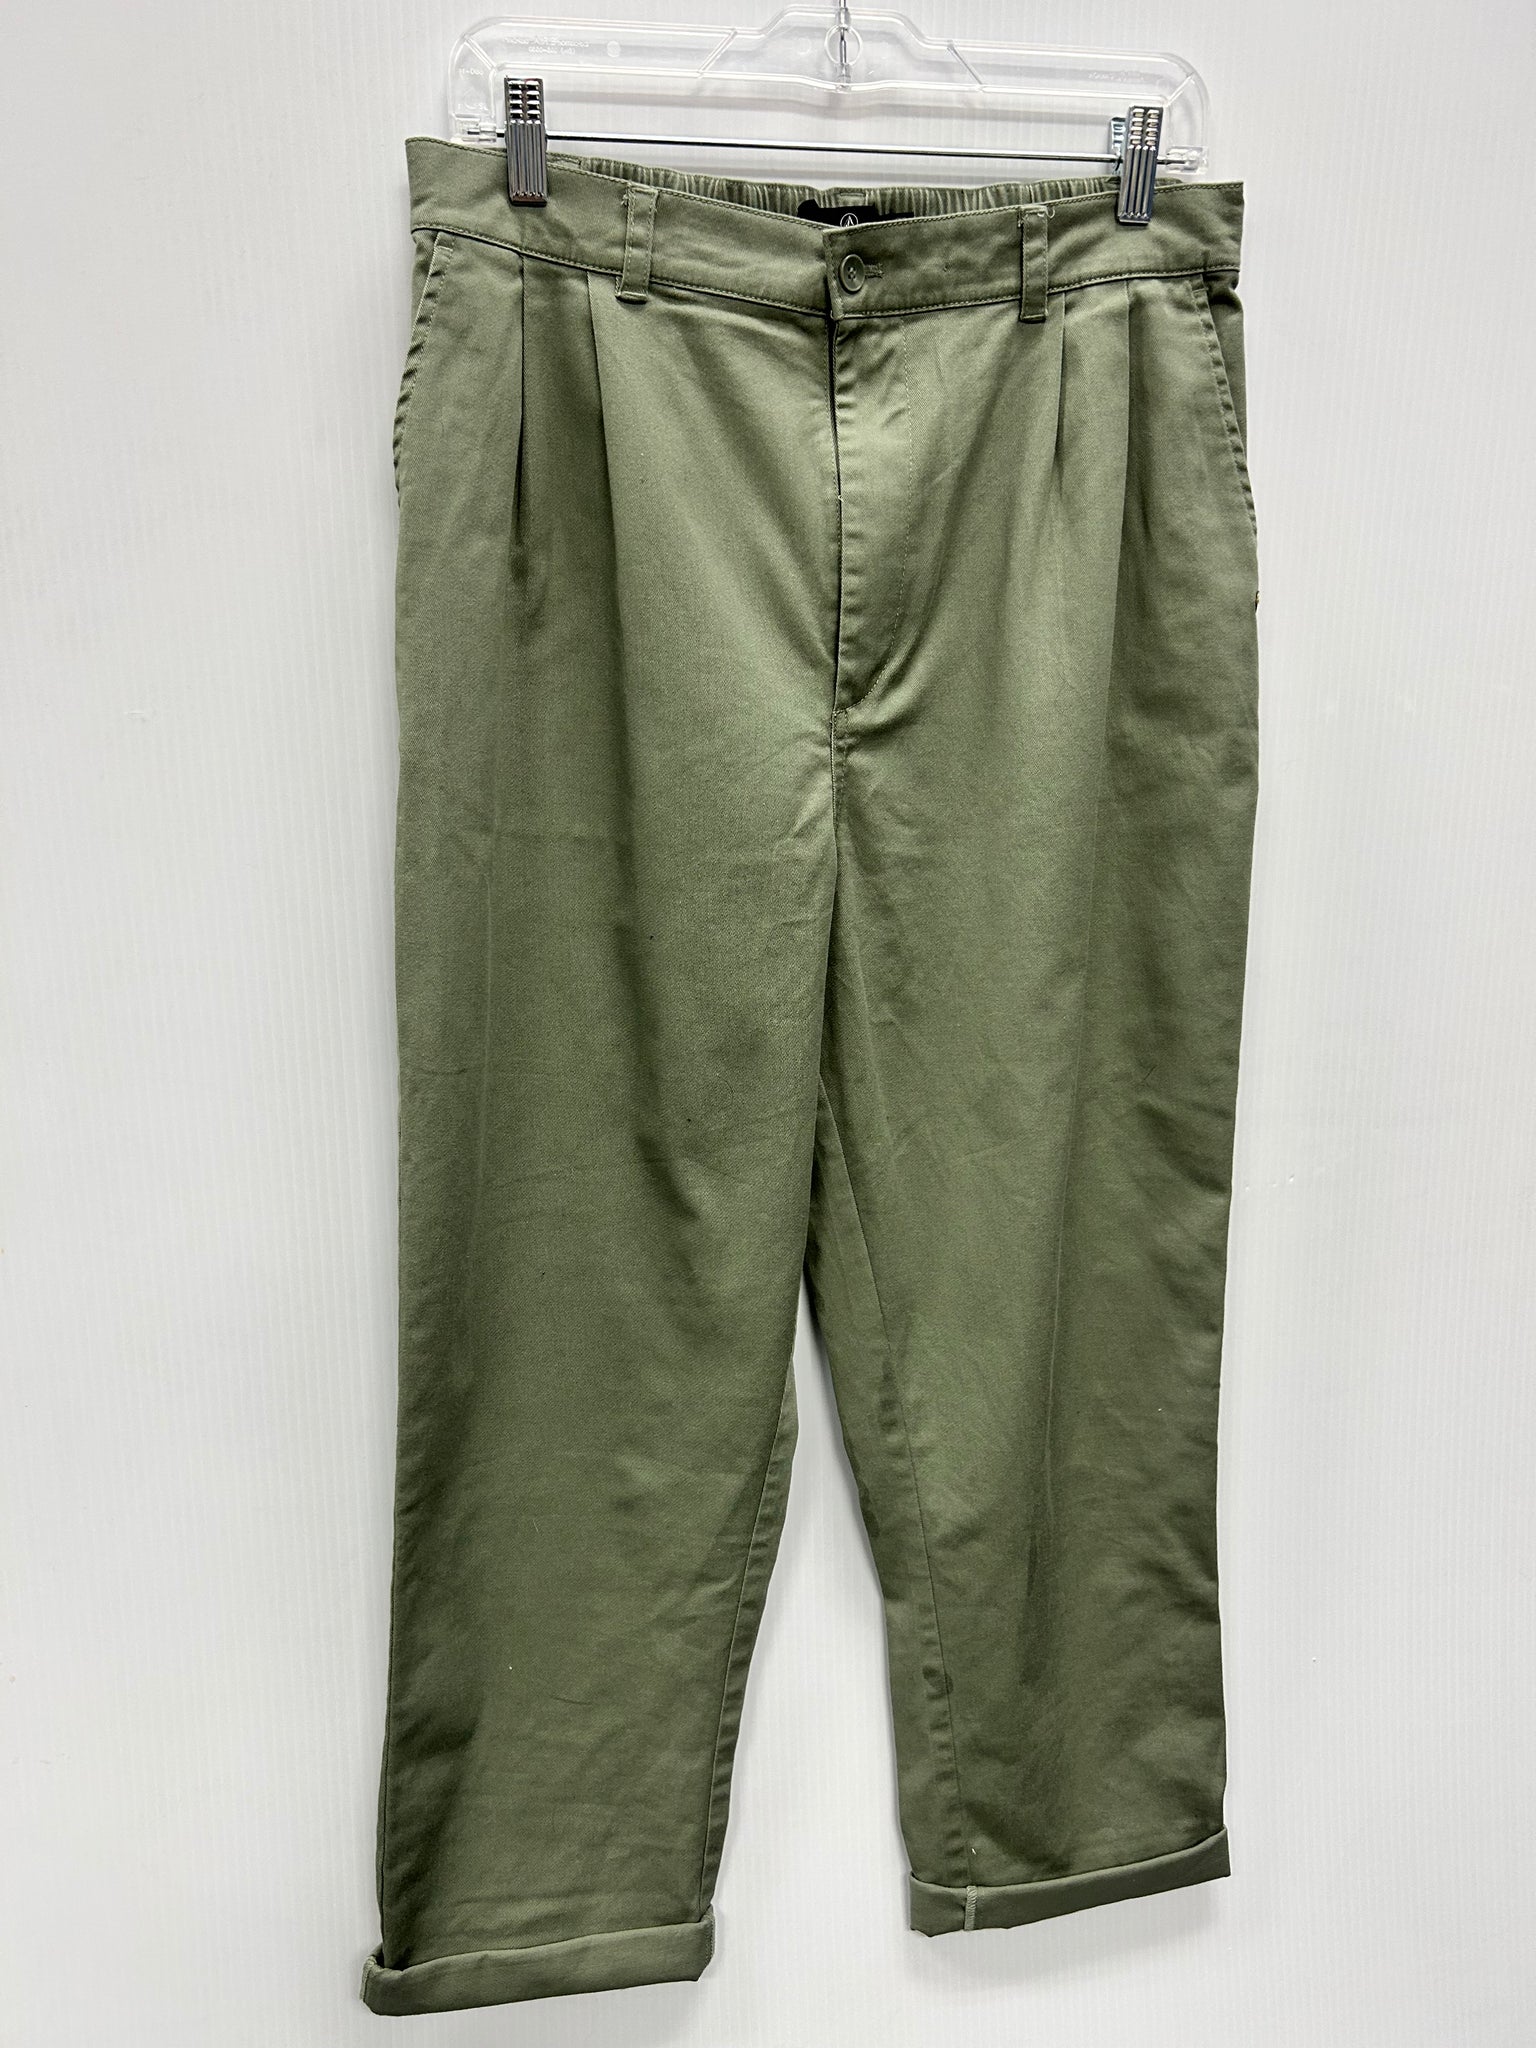 Size 32 Volcom Trousers Item No. 20937